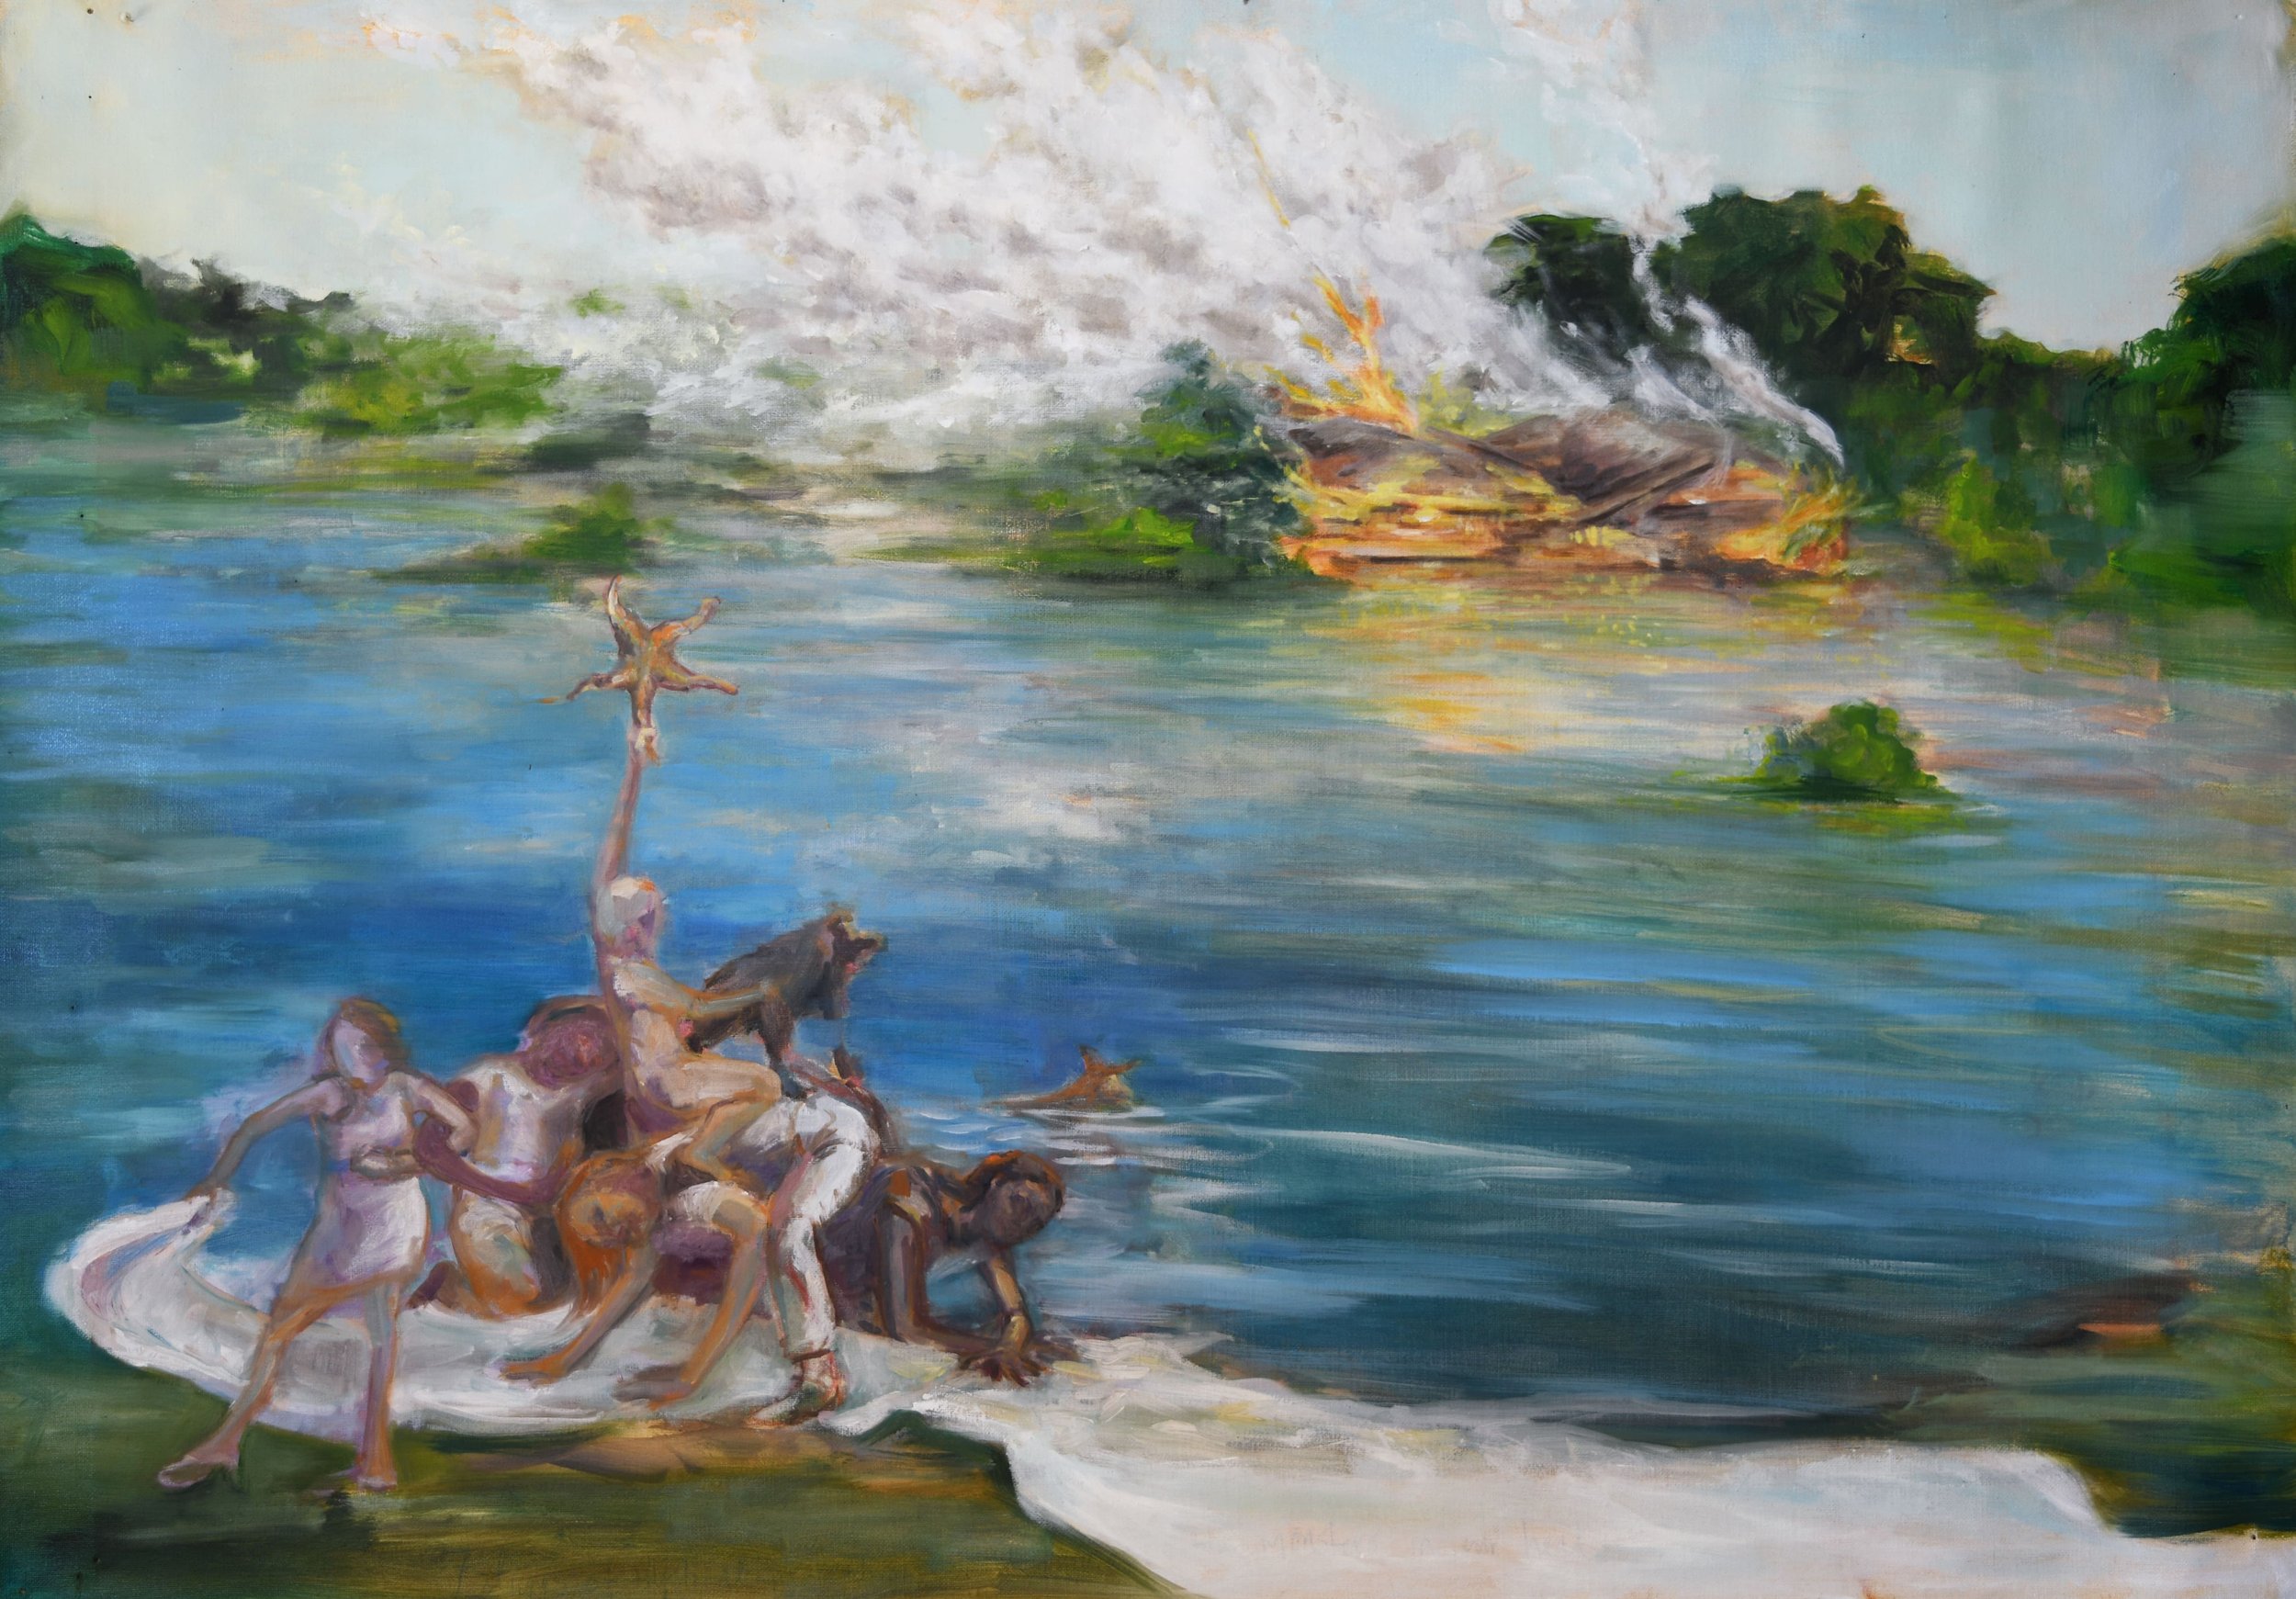 Emily_Hildebrand_Chumbaba and the 7 mystical layers of protection_110 x 80 cm_oil on linen_2022_300dpi-min.jpg